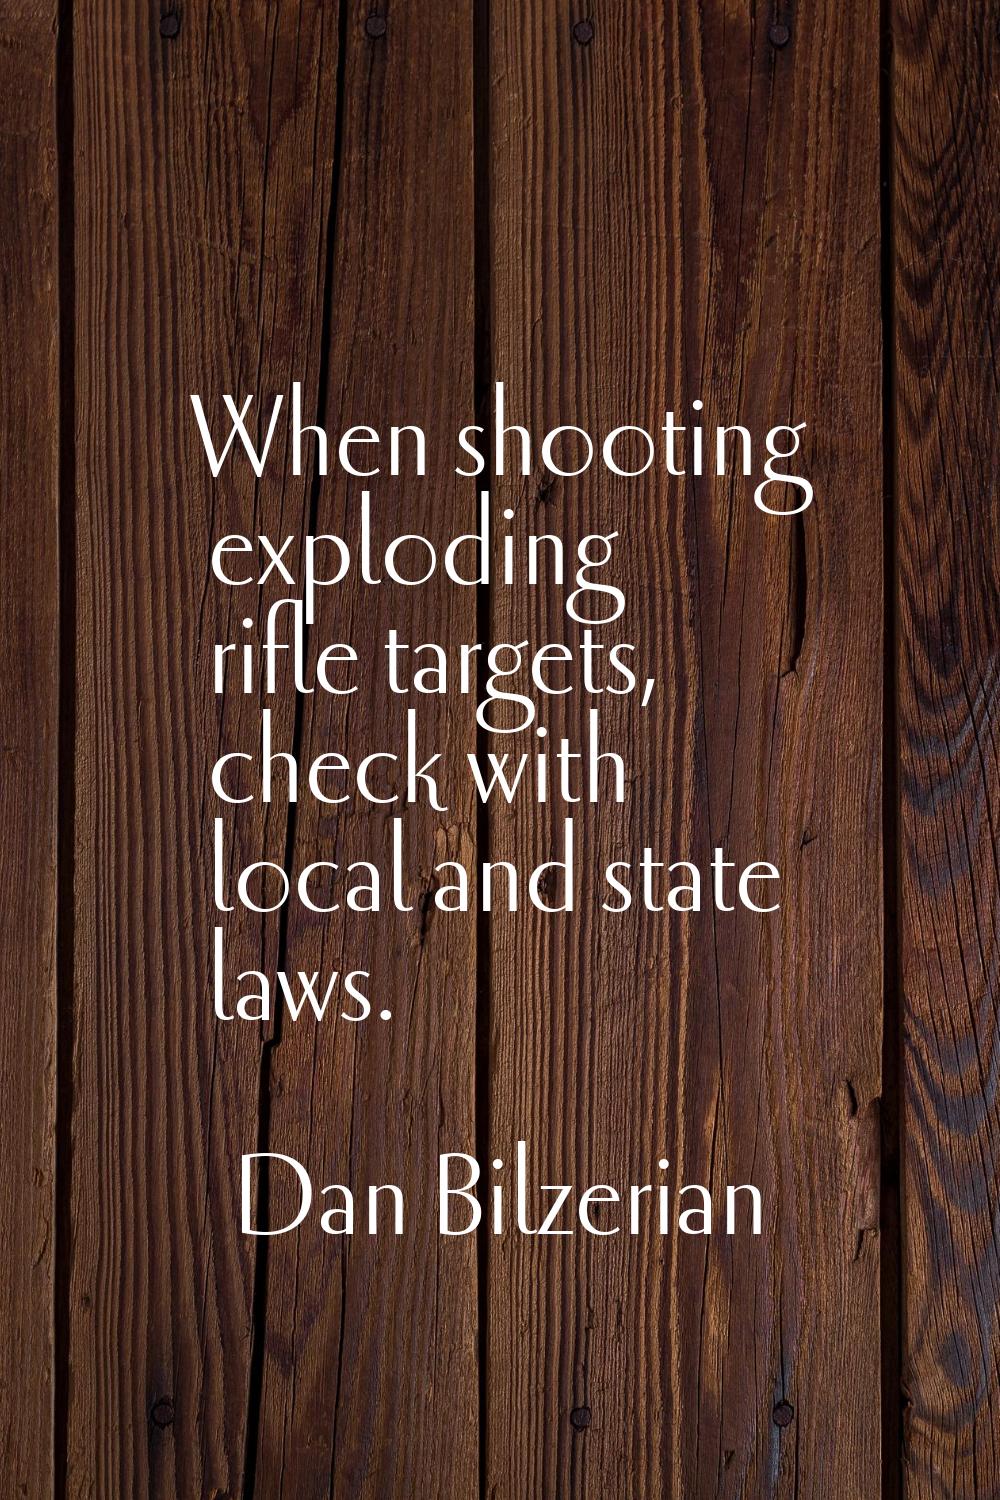 When shooting exploding rifle targets, check with local and state laws.